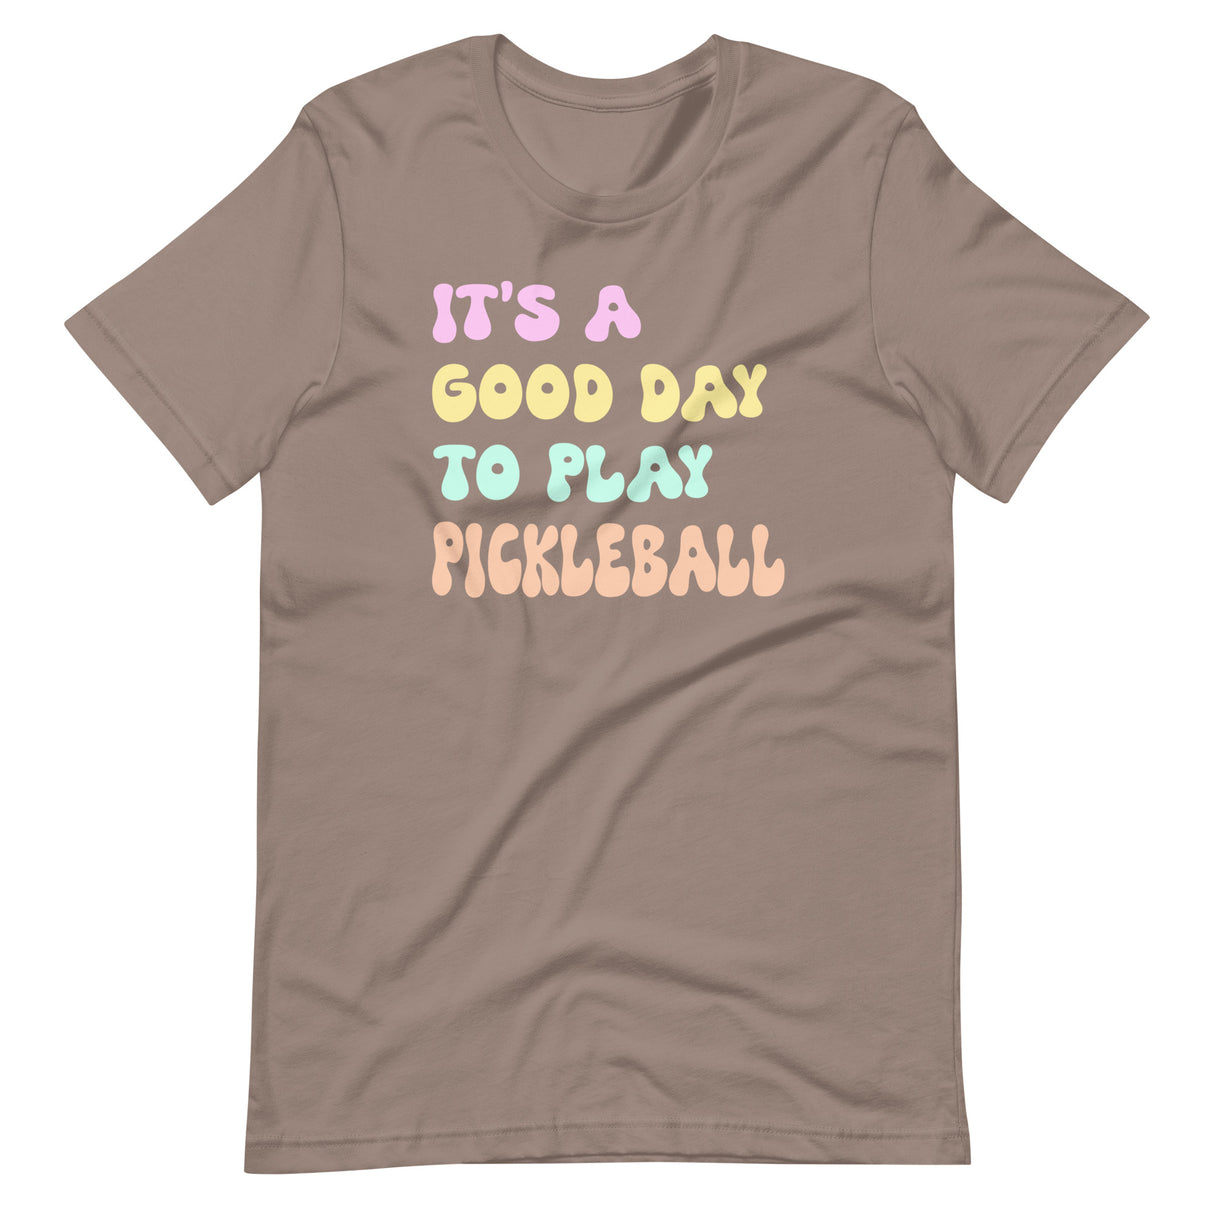 It's a Good Day To Play Pickleball Shirt